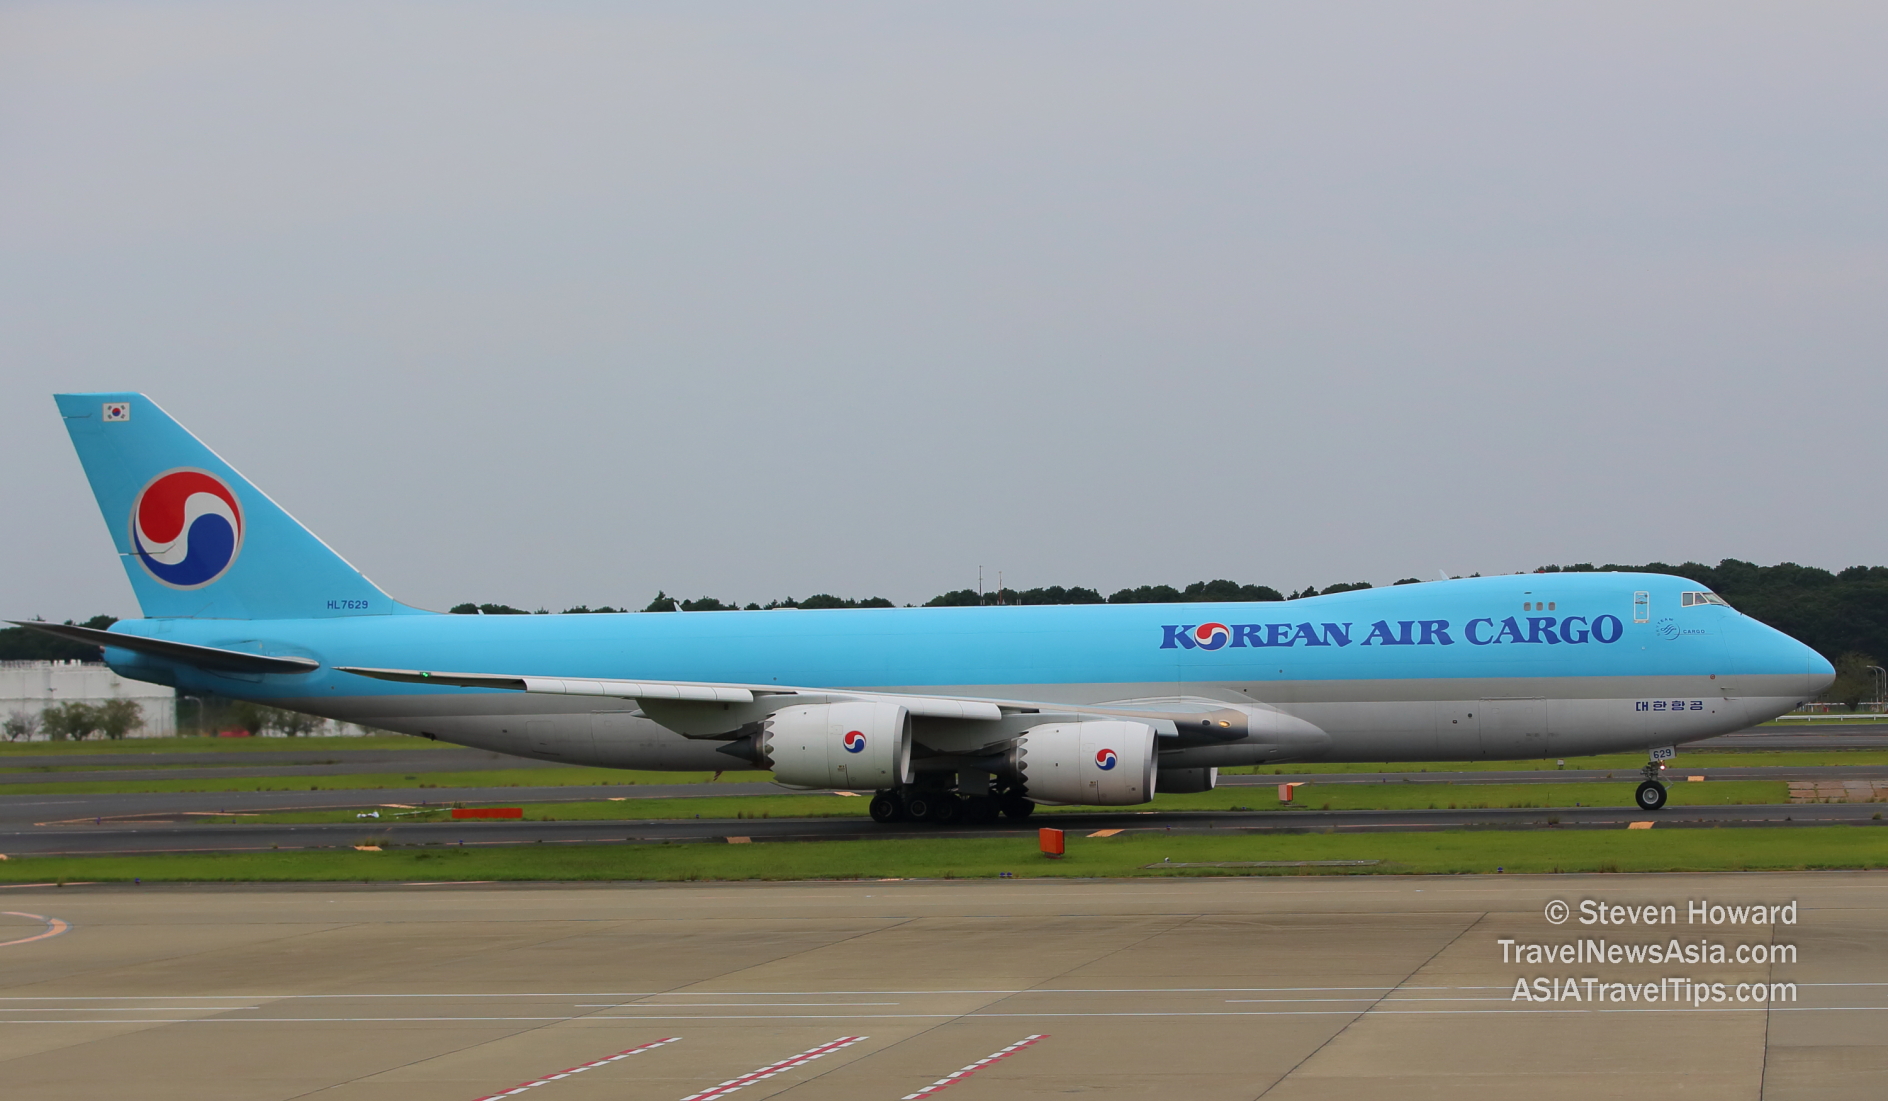 Korean Air Cargo Boeing 747-8F reg: HL7629. Picture by Steven Howard of TravelNewsAsia.com. Click to enlarge.